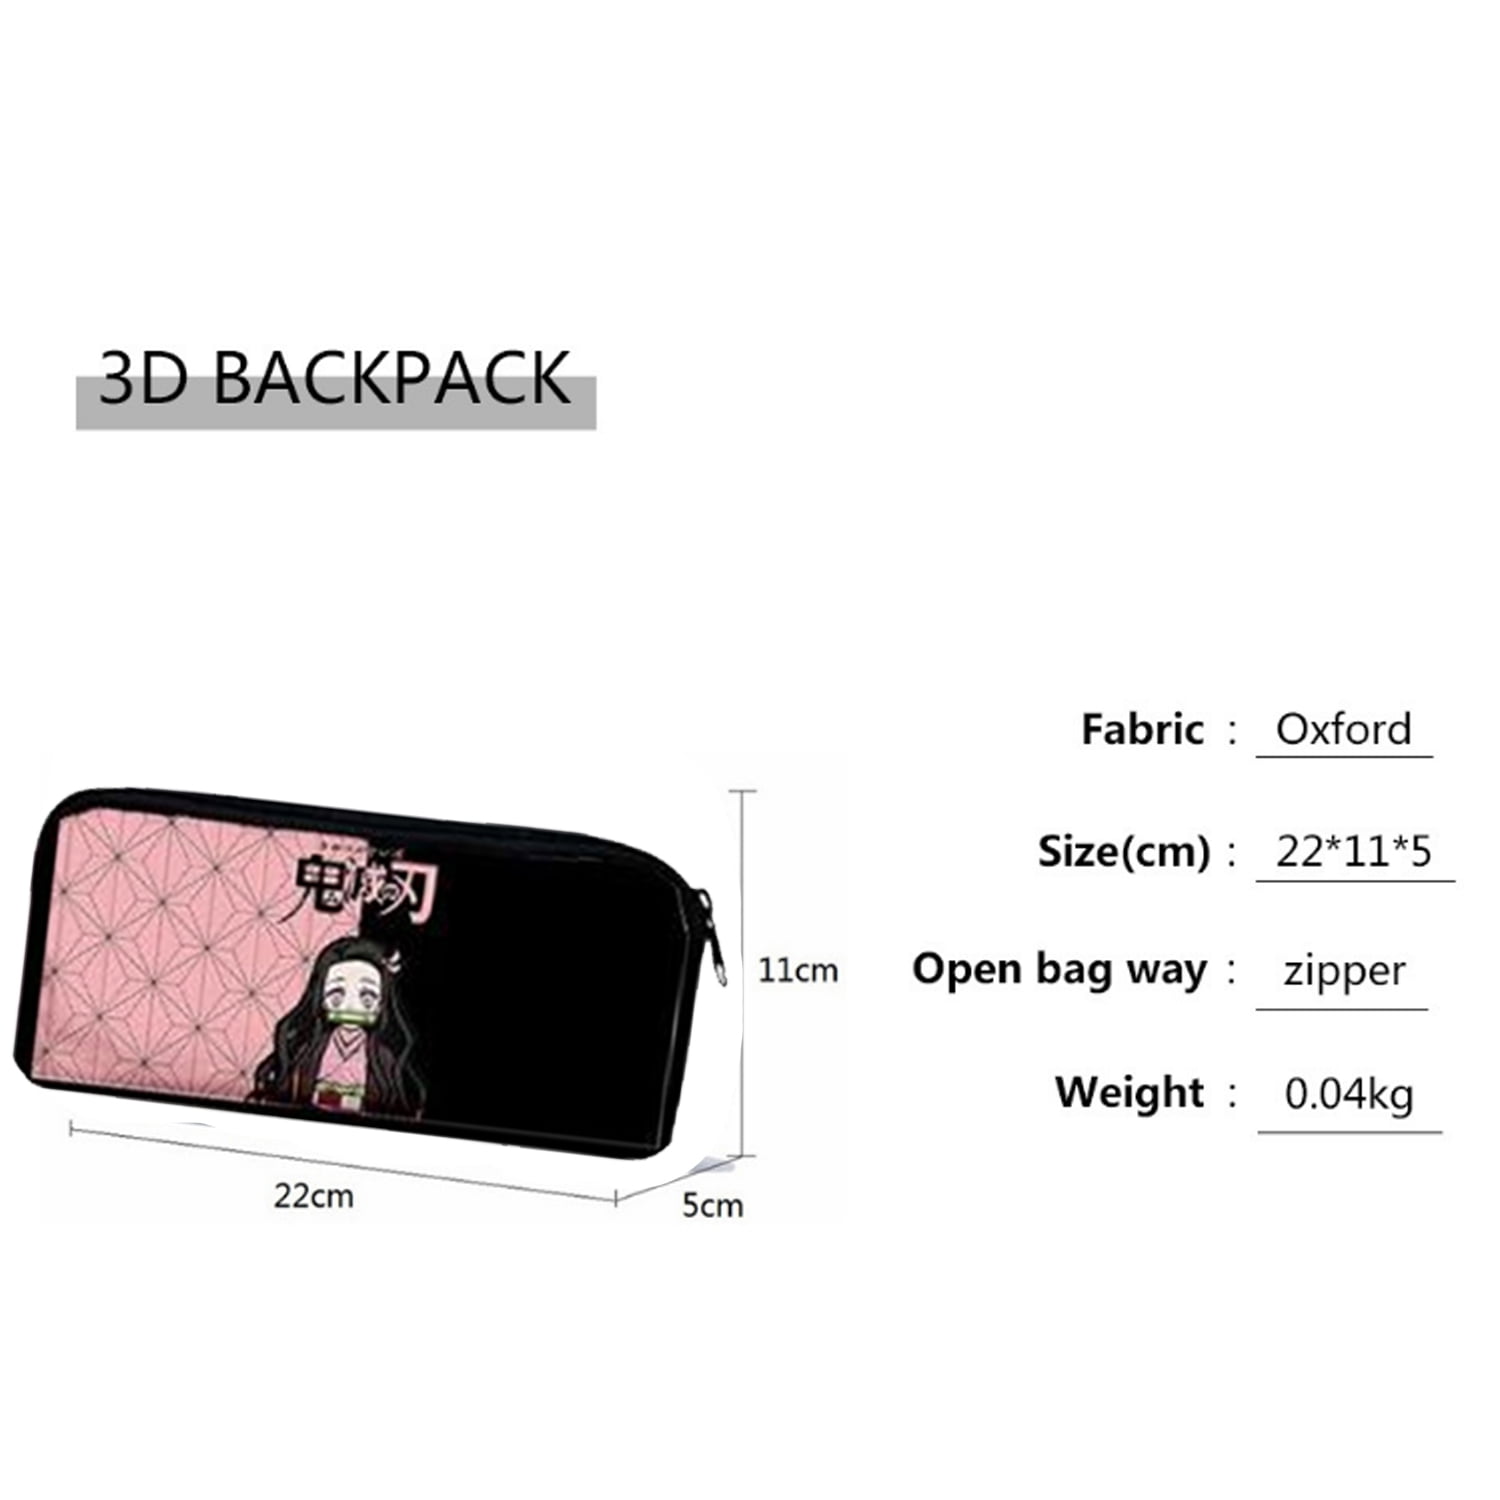 3Pieces Anime Laptop Schoolbag Slant Demon Slayer Backpack Creative Super  Anime 3D Printed+Shoulder Bags with Pencil Case Back to School Gifts 